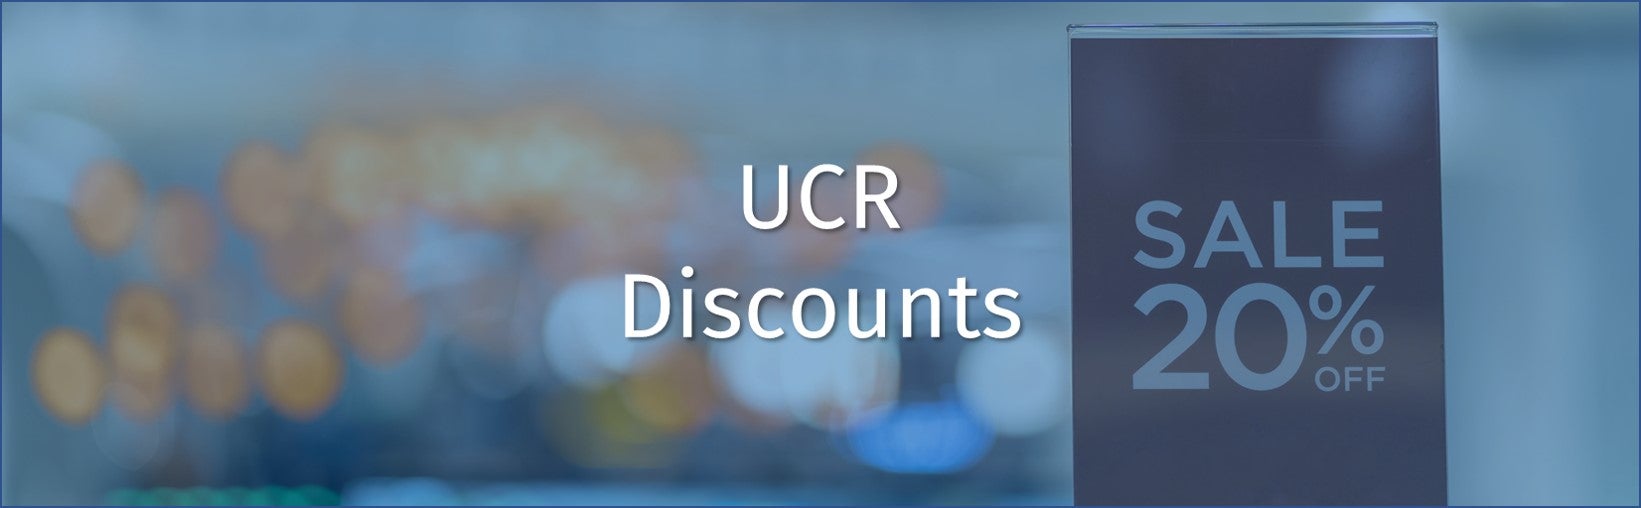 Employee Resources - UCR Discounts banner image